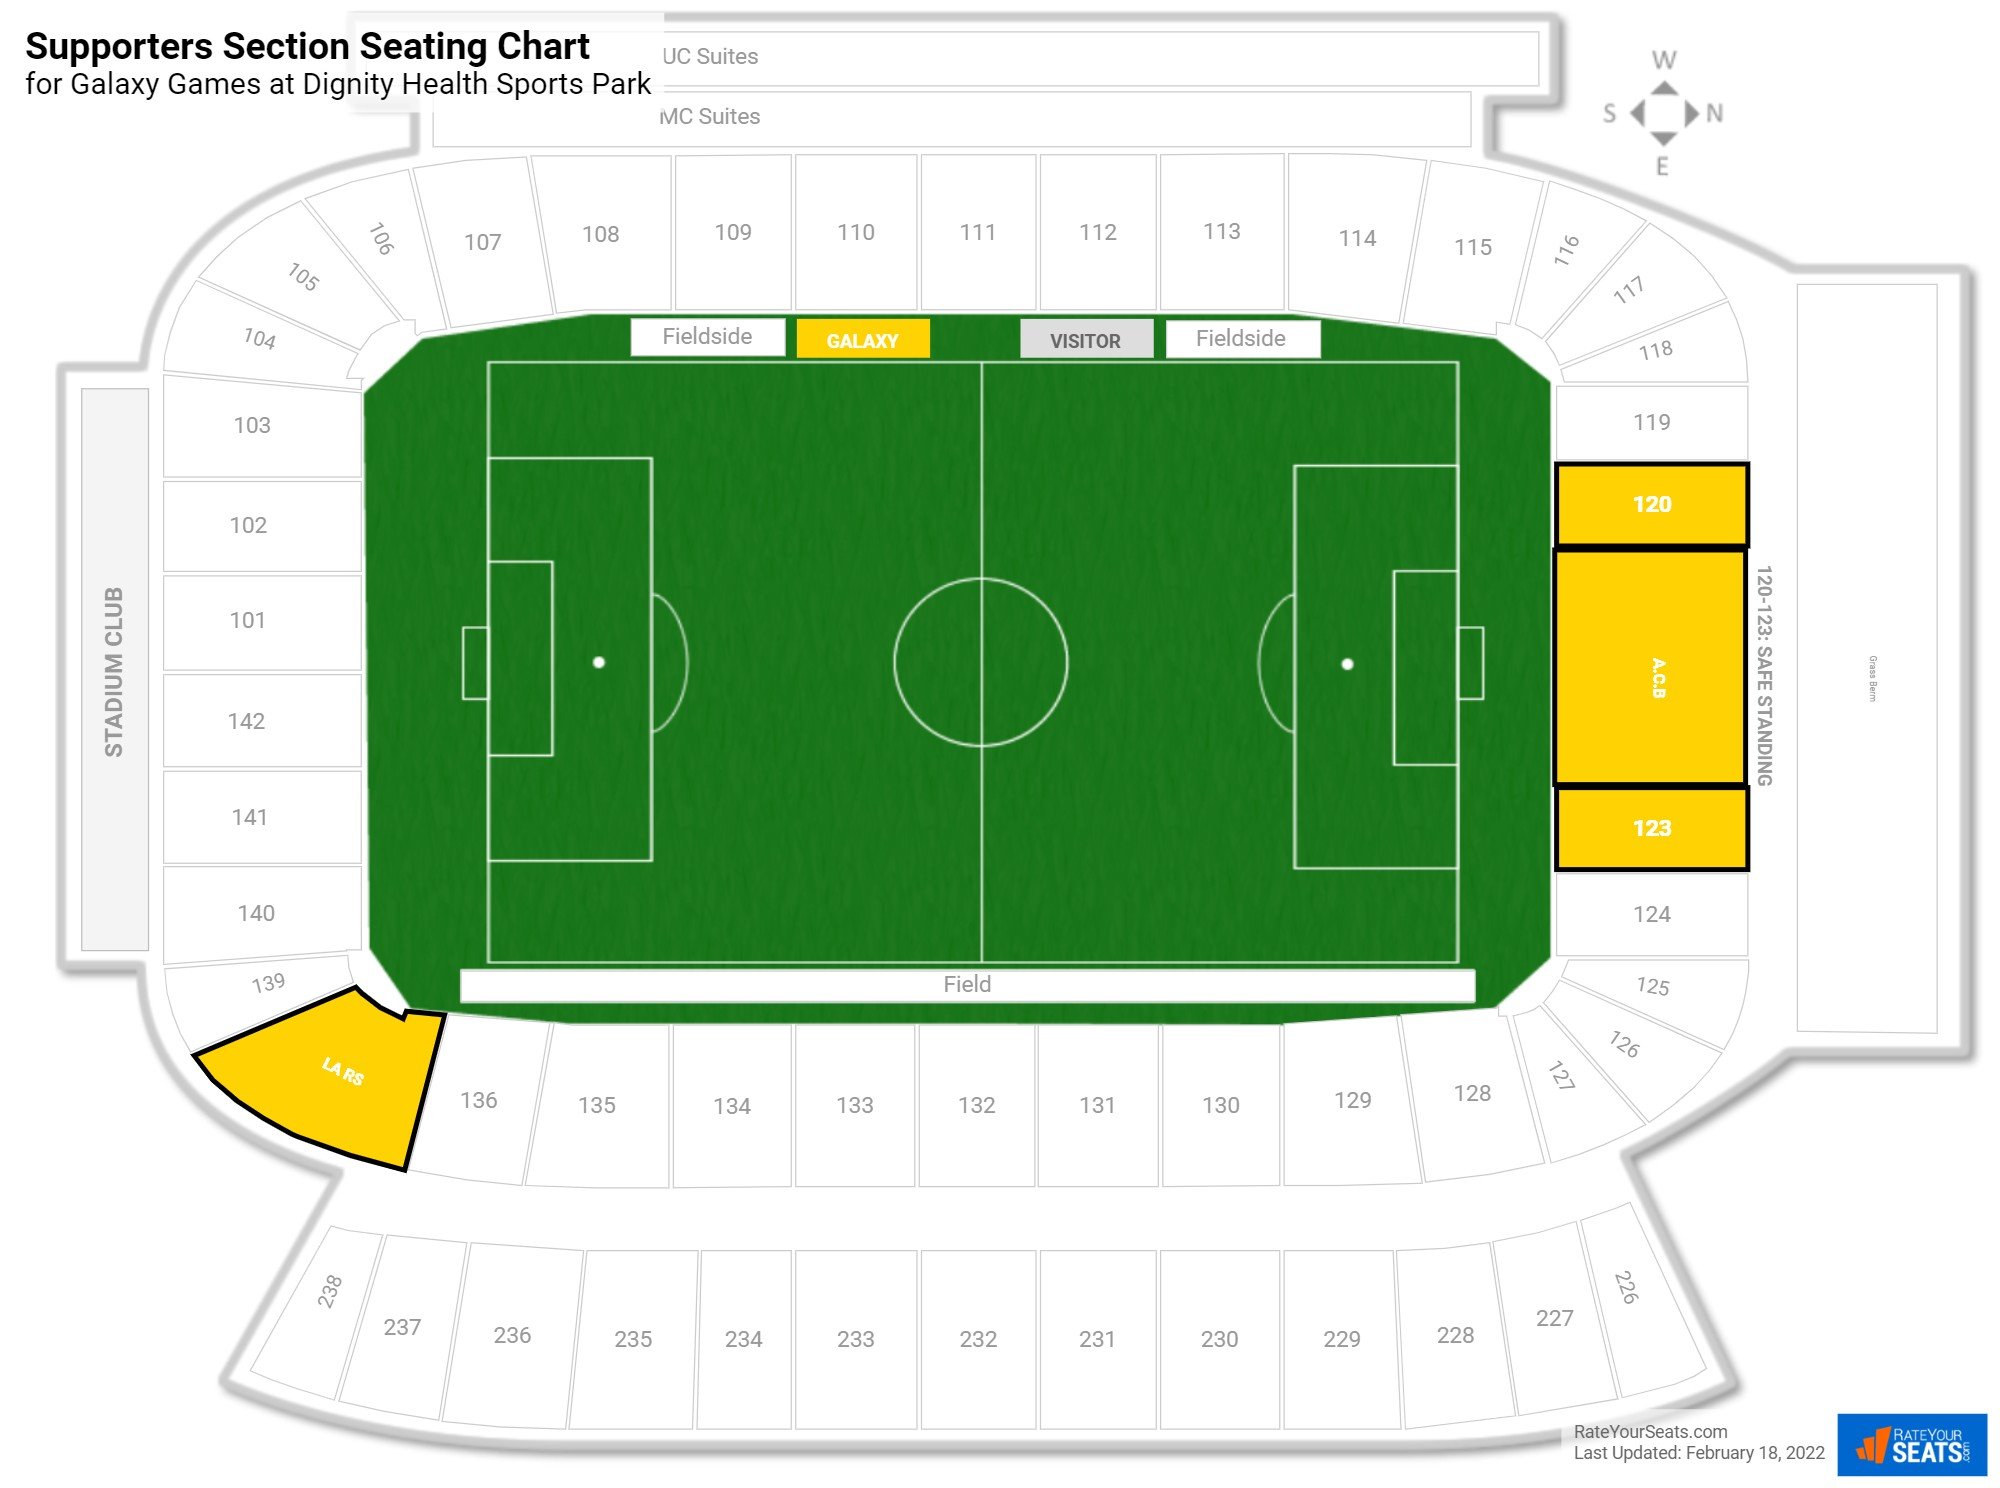 Galaxy Supporters Section Seating Chart at Dignity Health Sports Park